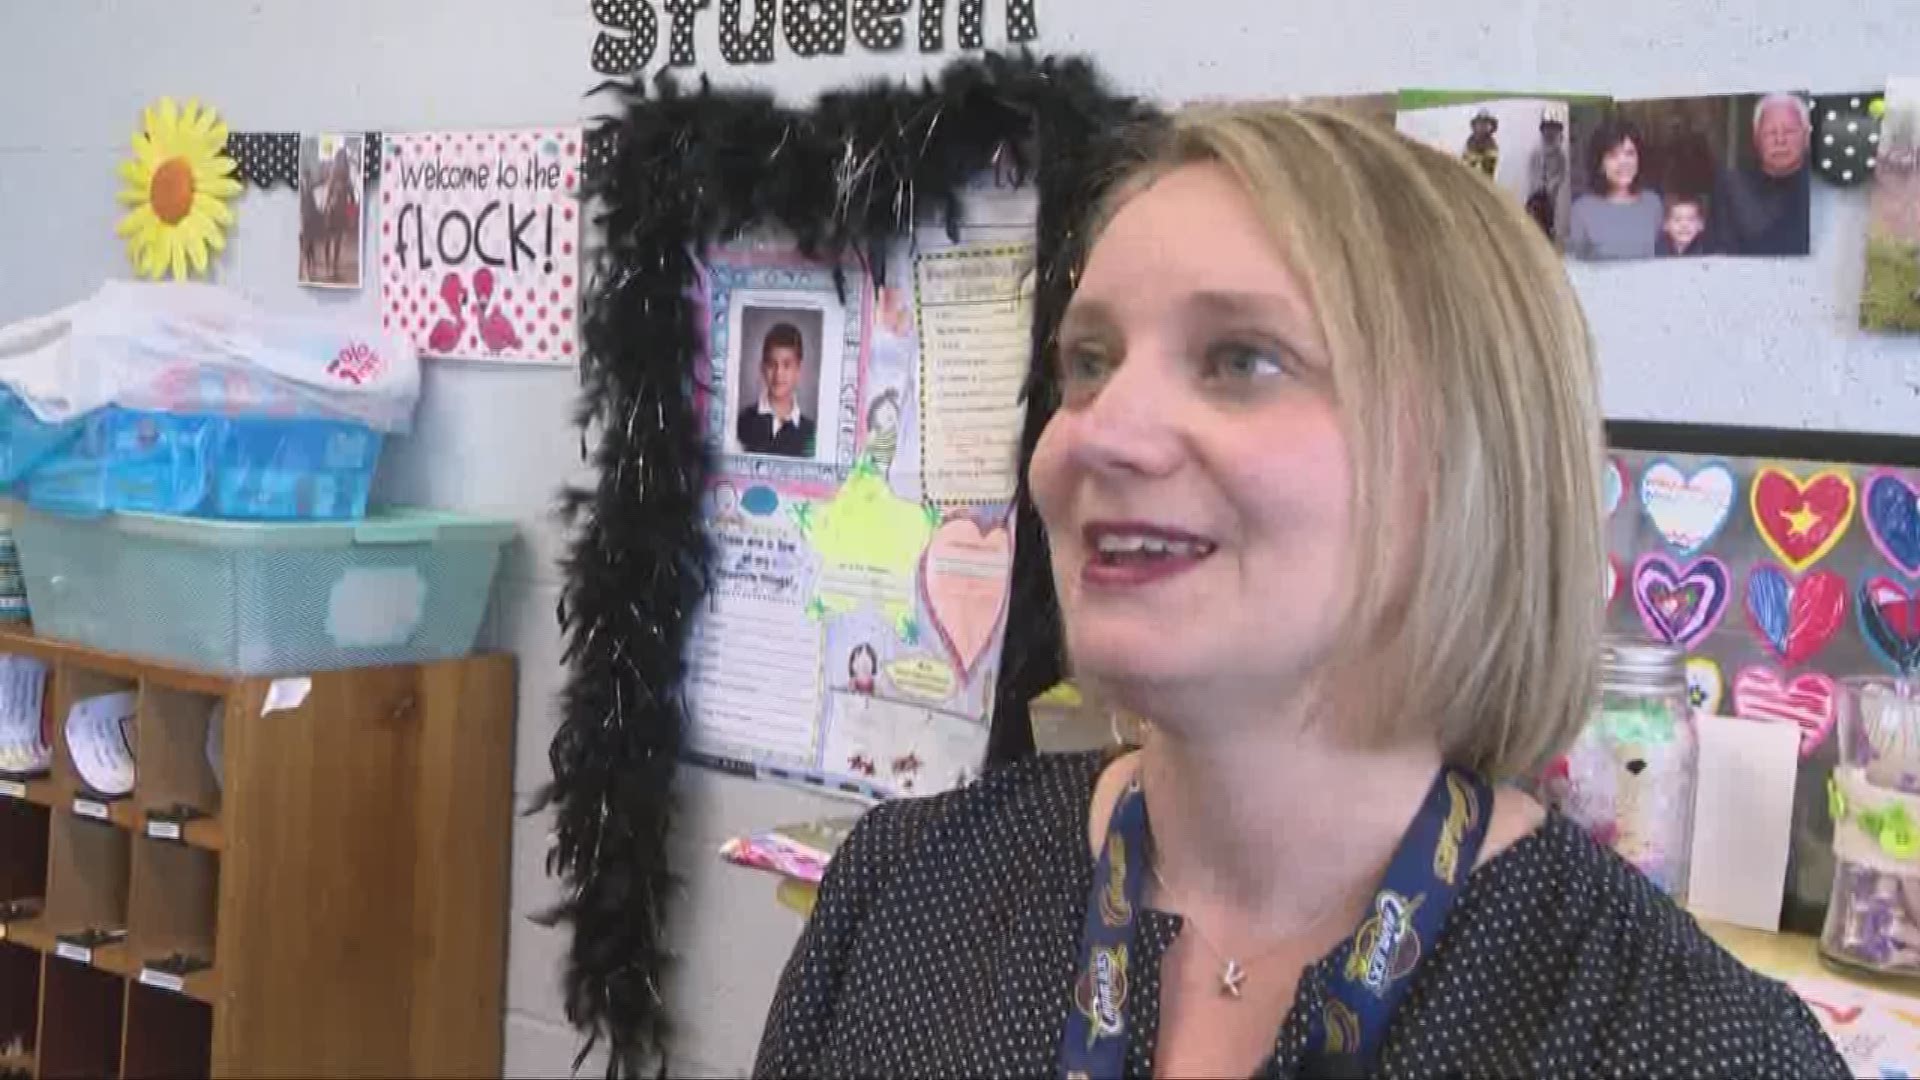 May 8, 2018: Meet Mrs. Andrea McKinney, a first-grade teacher from Hinckley Elementary School. The honor came as a shock to the long-time teacher, but to those close to her it was anything but a surprise.